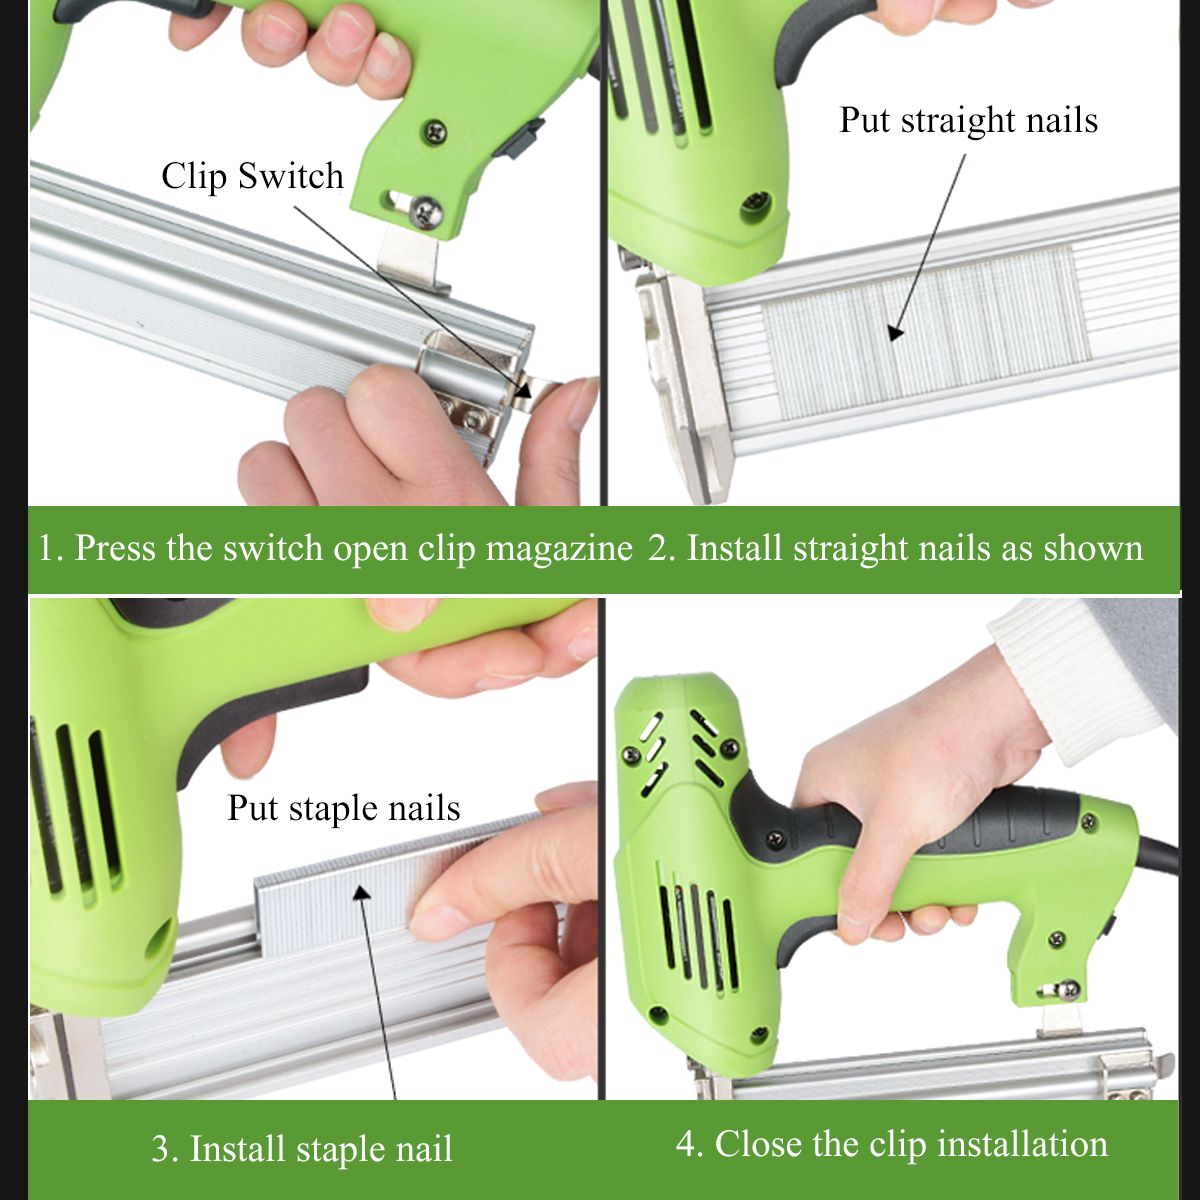 220V-Electric-Brad-Nail-U-Type-Staple-Dual-Use-Staple-Woodworking-Tools-Green-1683431